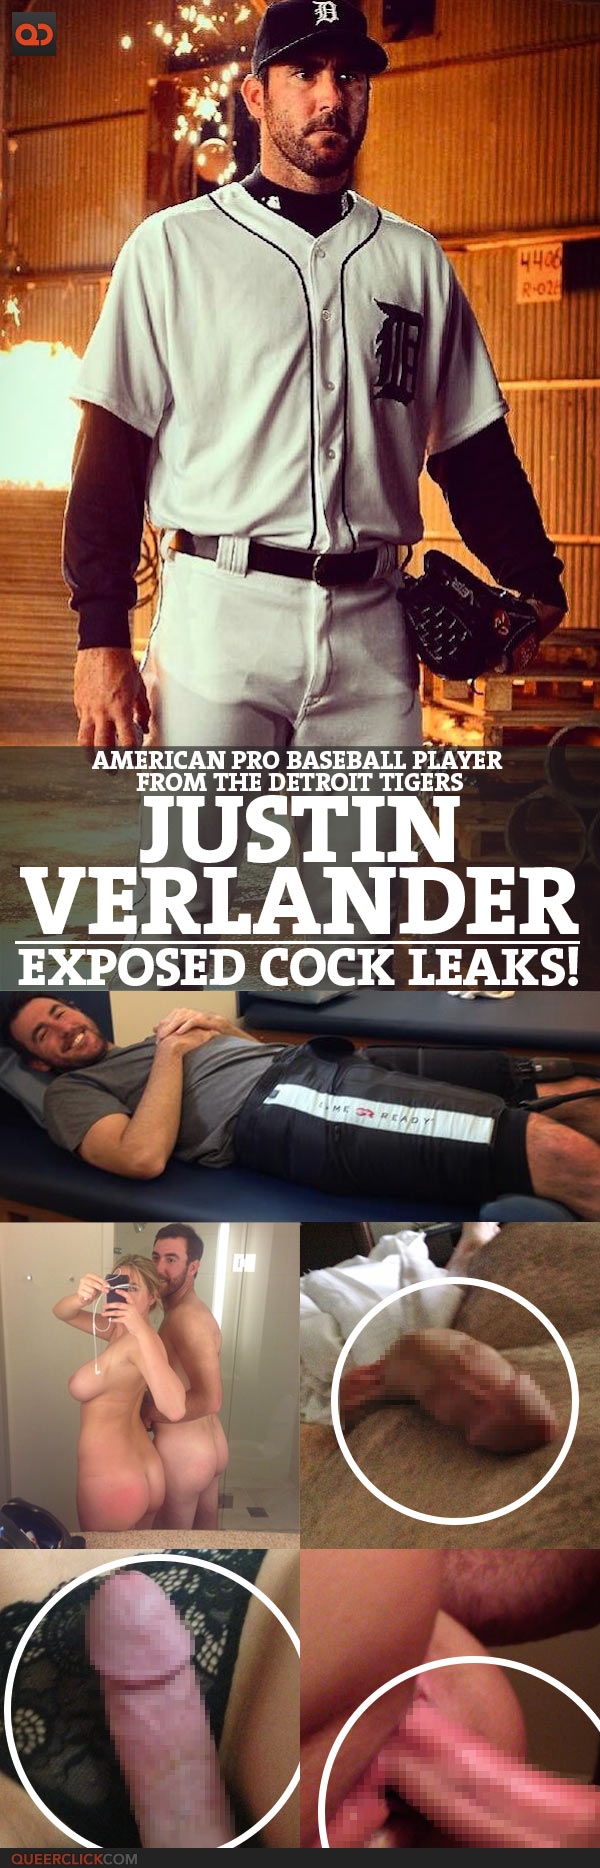 Justin Verlander, American Pro Baseball Player From The Detroit Tigers, Exposed Cock Leaks!